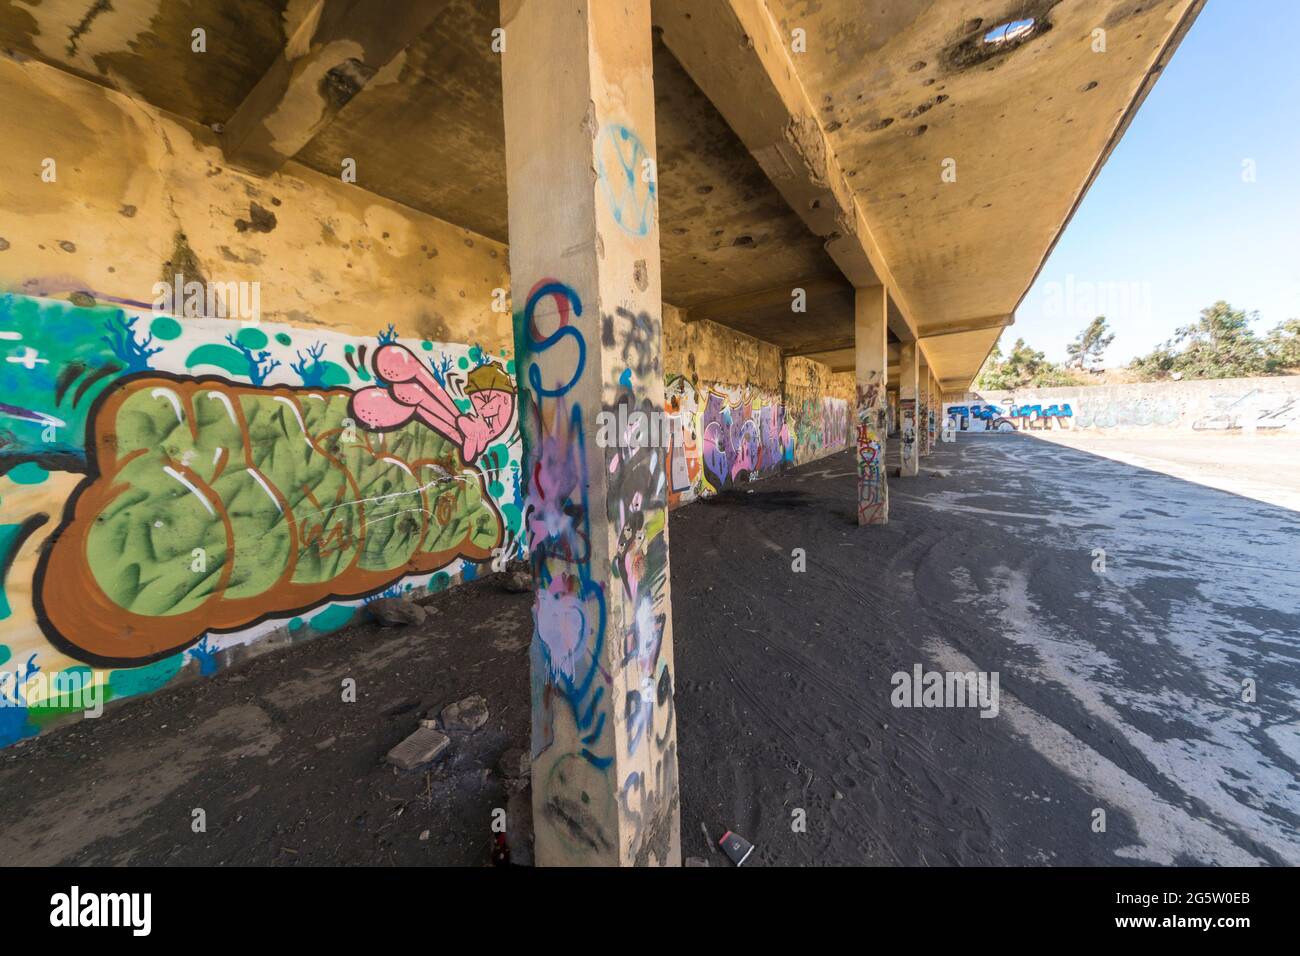 Golan Heights, Israel. The former HQ building of the Syrian intelligence service, now abandoned and graffitti-covered. Stock Photo